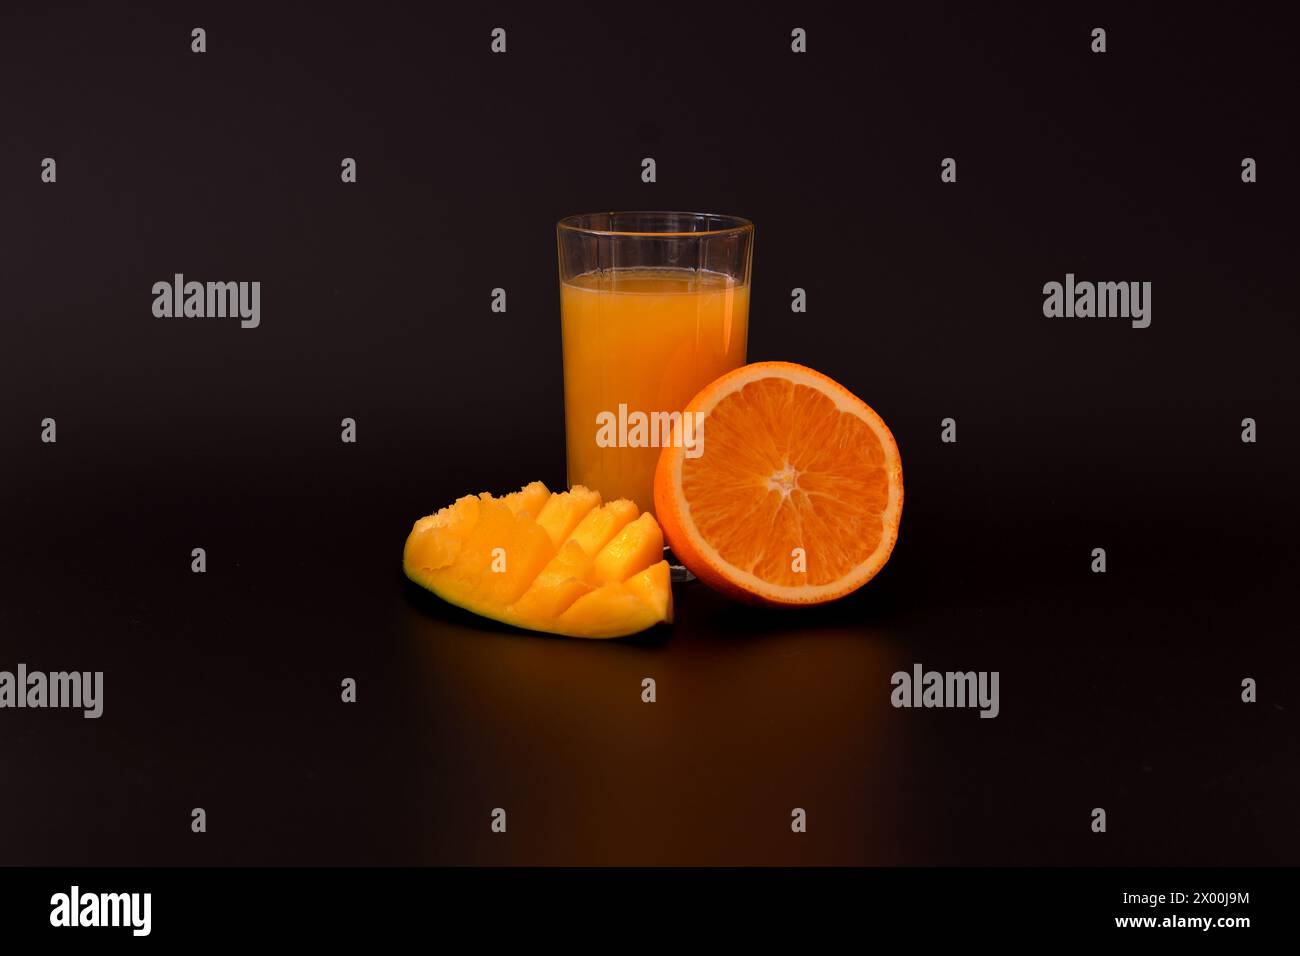 A glass glass of a mixture of tropical fruit juice on a black background, next to pieces of mango and ripe orange. Close-up. Stock Photo